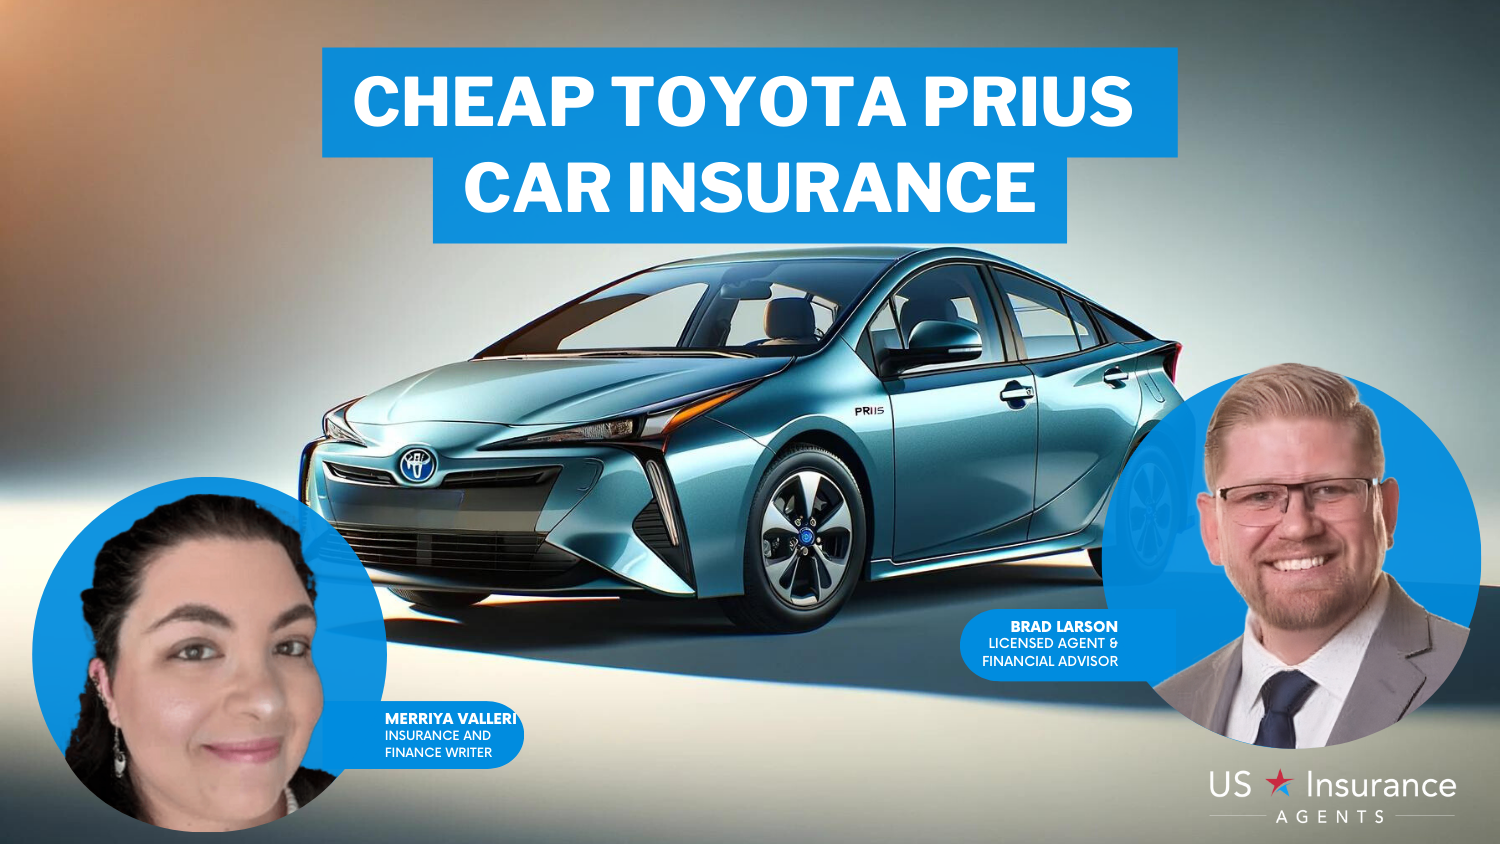 State Farm, American Family and Allstate: cheap Toyota Prius car insurance